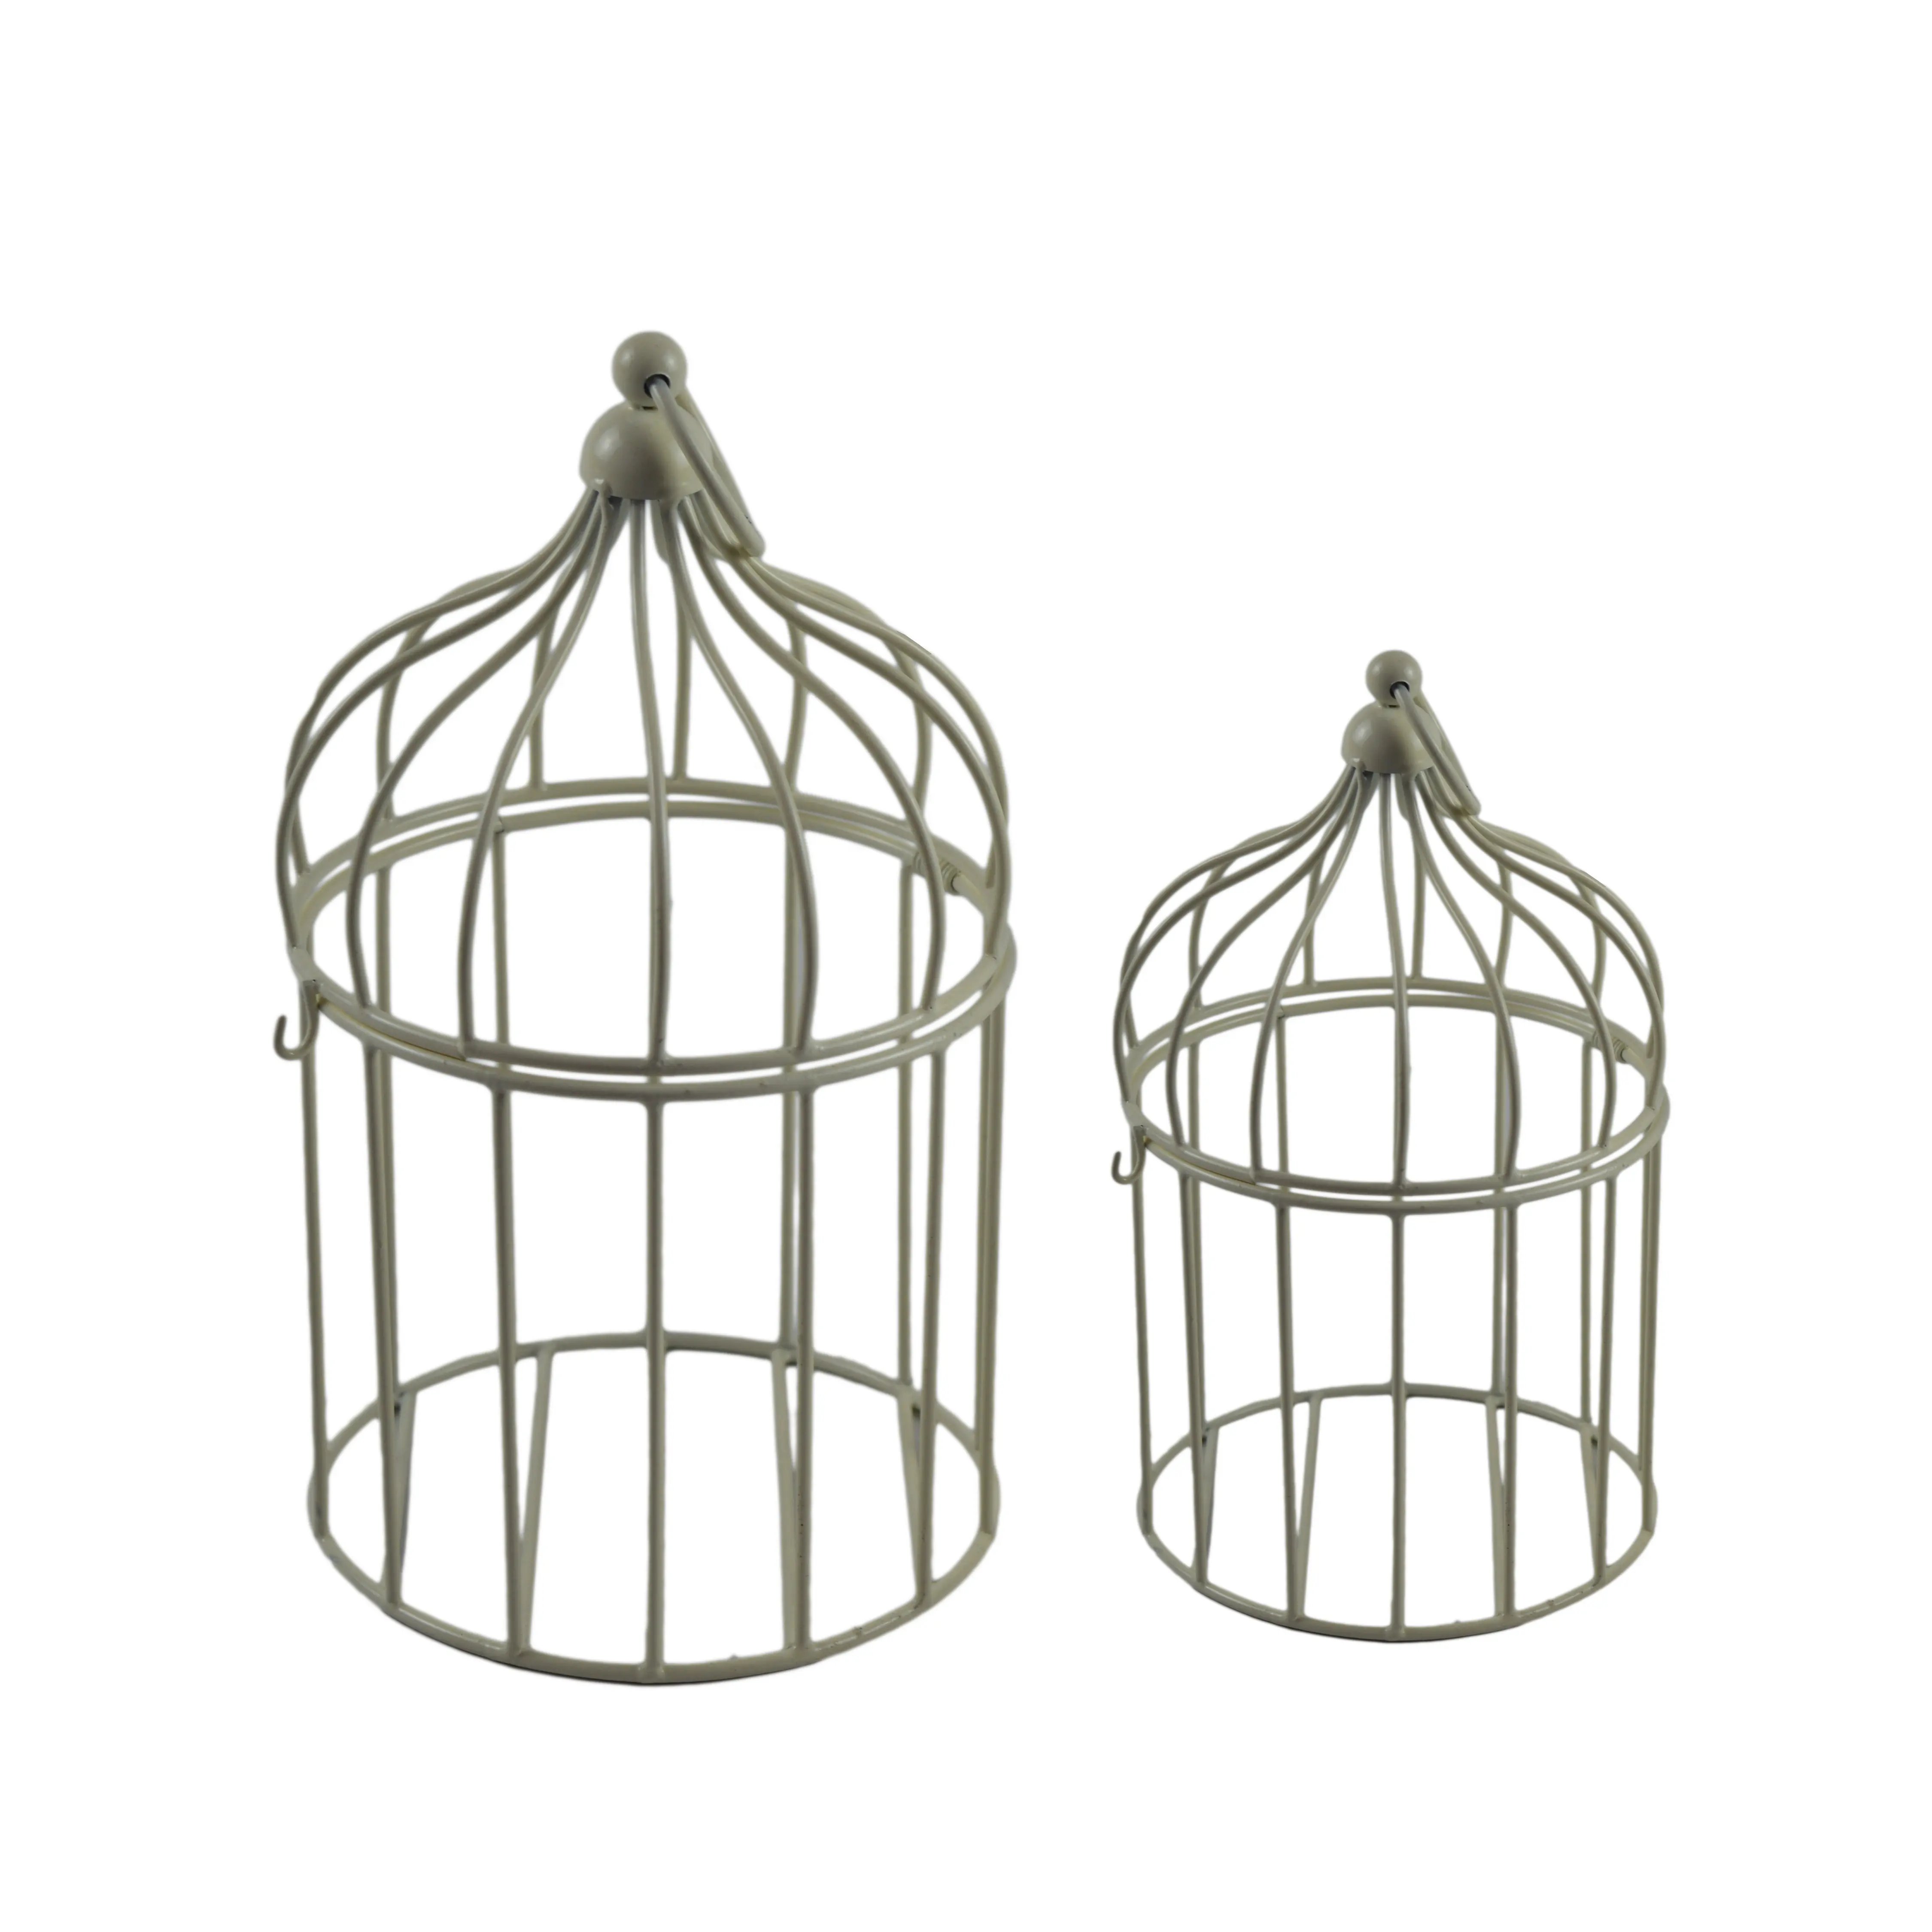 High Class Quality Iron Metal Hanging Birds Cages For Home Decor And Balcony Decorative Best Design Birds Cages